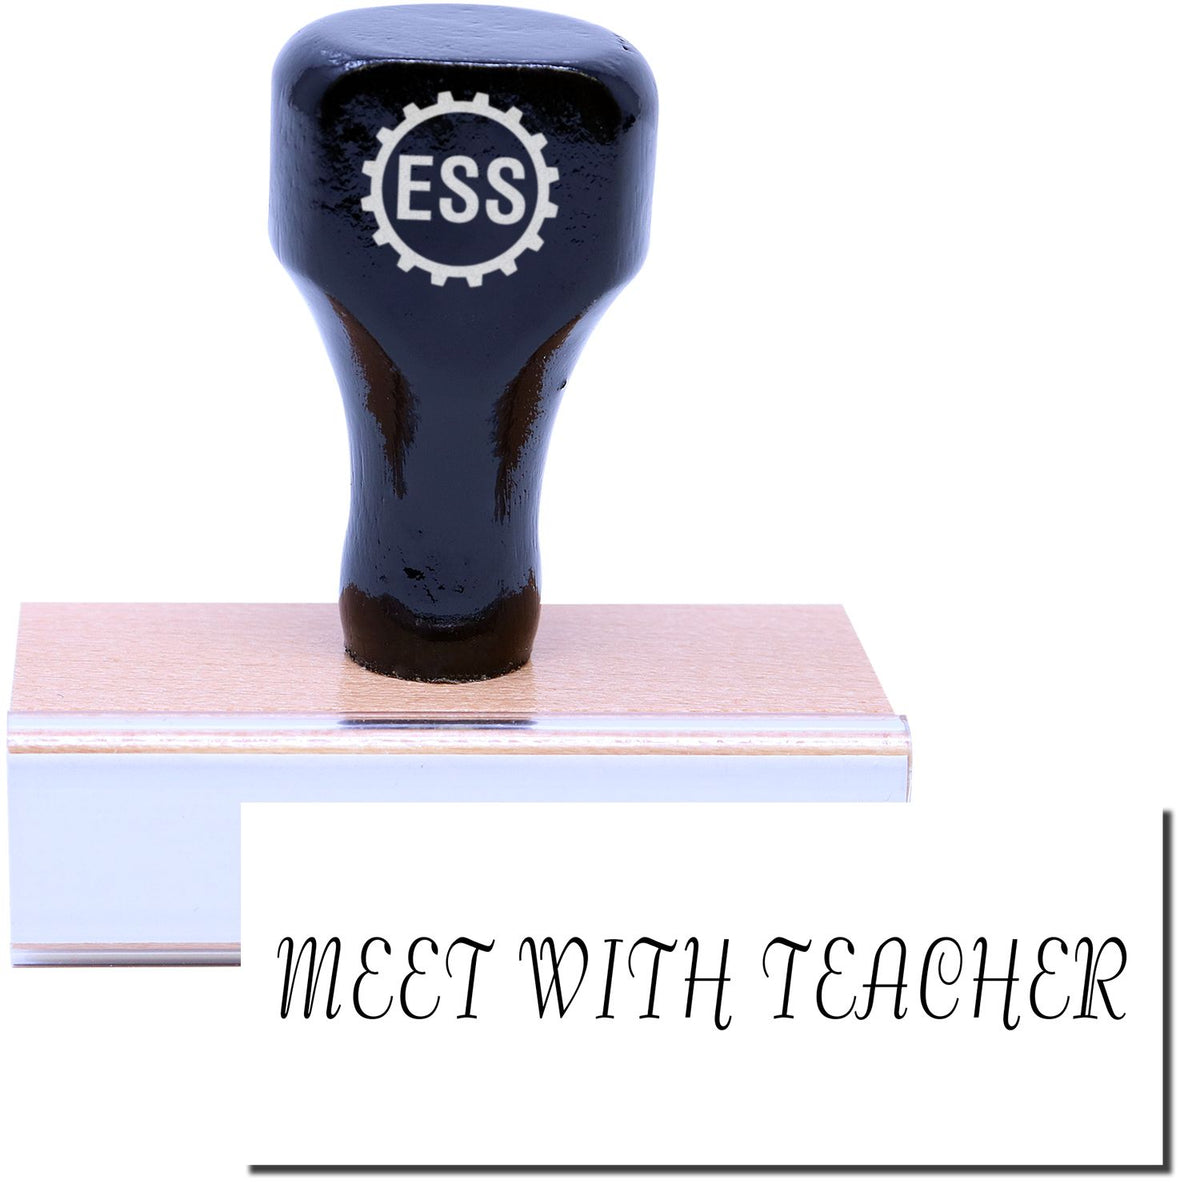 A stock office rubber stamp with a stamped image showing how the text &quot;MEET WITH TEACHER&quot; in a large font is displayed after stamping.